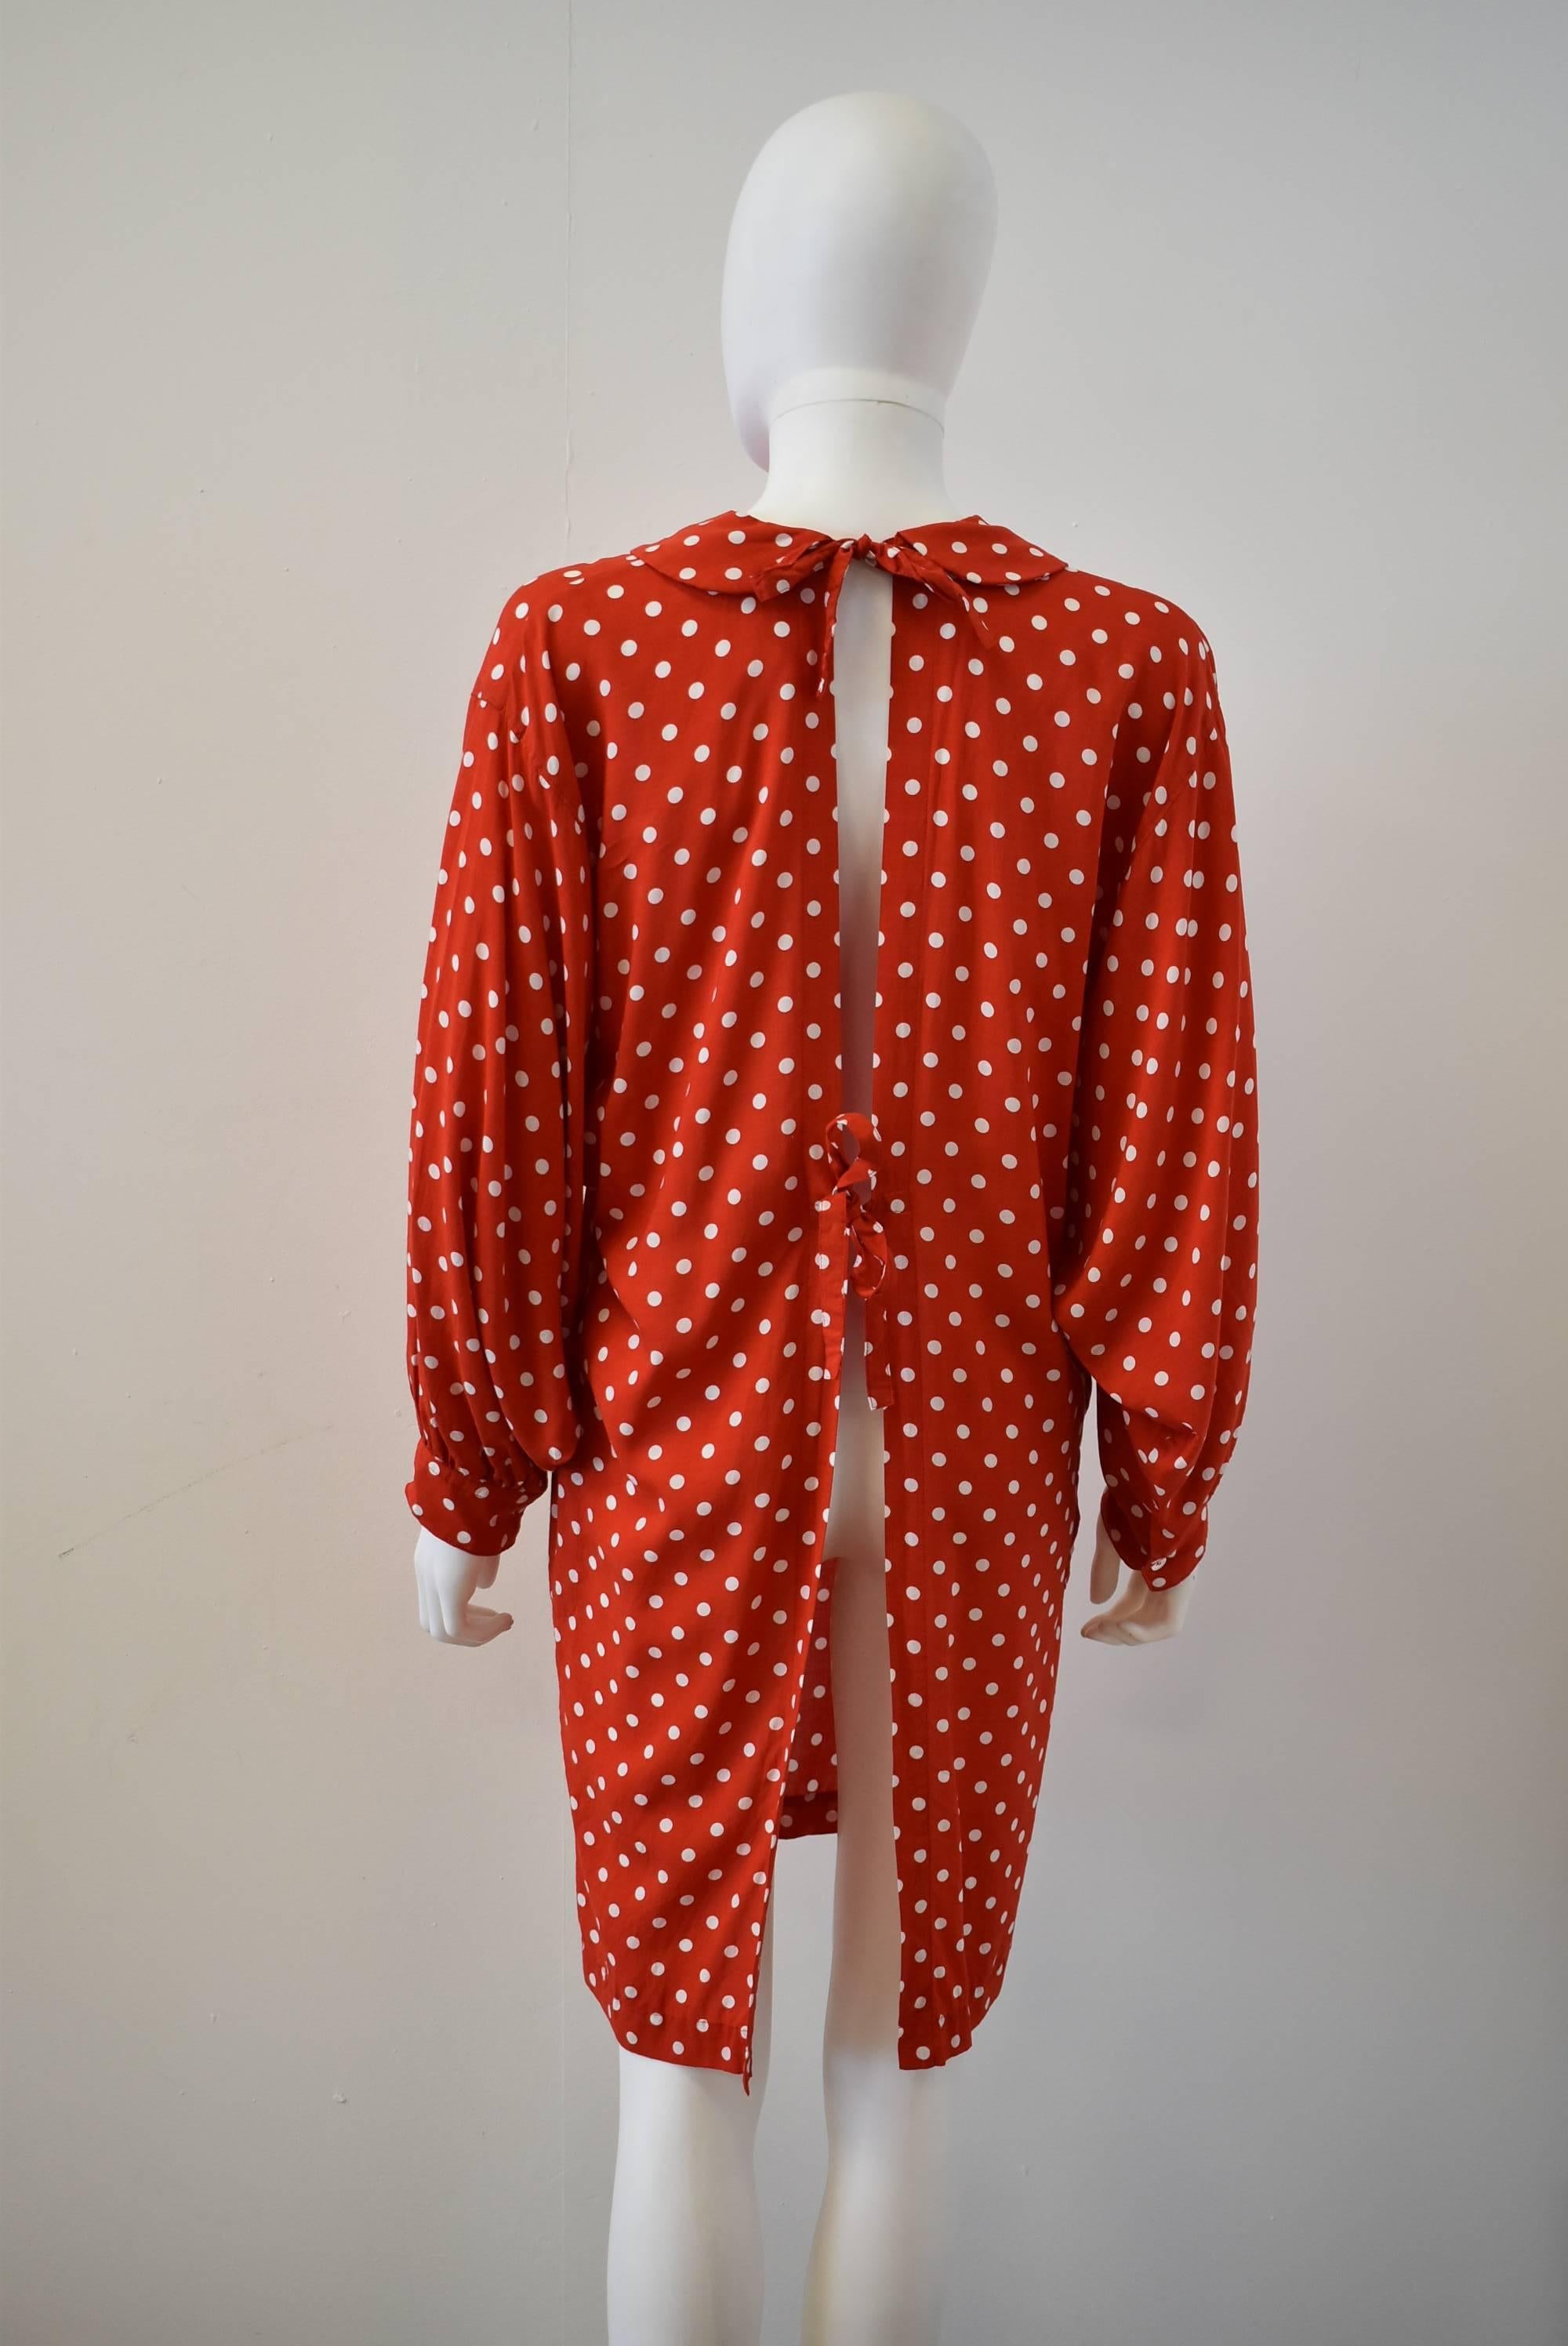 Women's Comme des Garcons red and white polka dot pinafore dress 2013